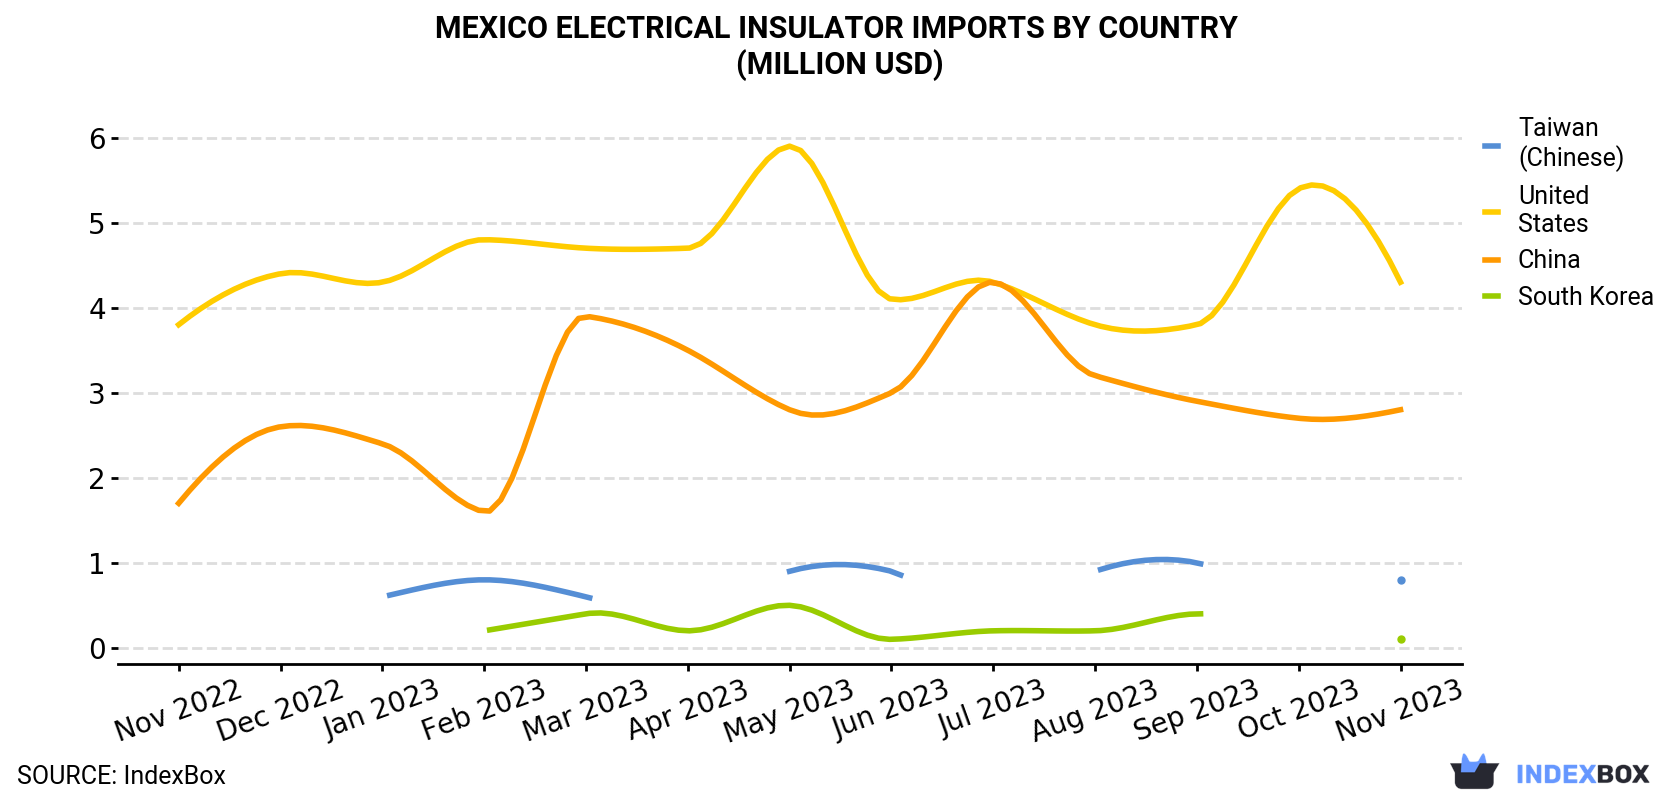 Mexico Electrical Insulator Imports By Country (Million USD)